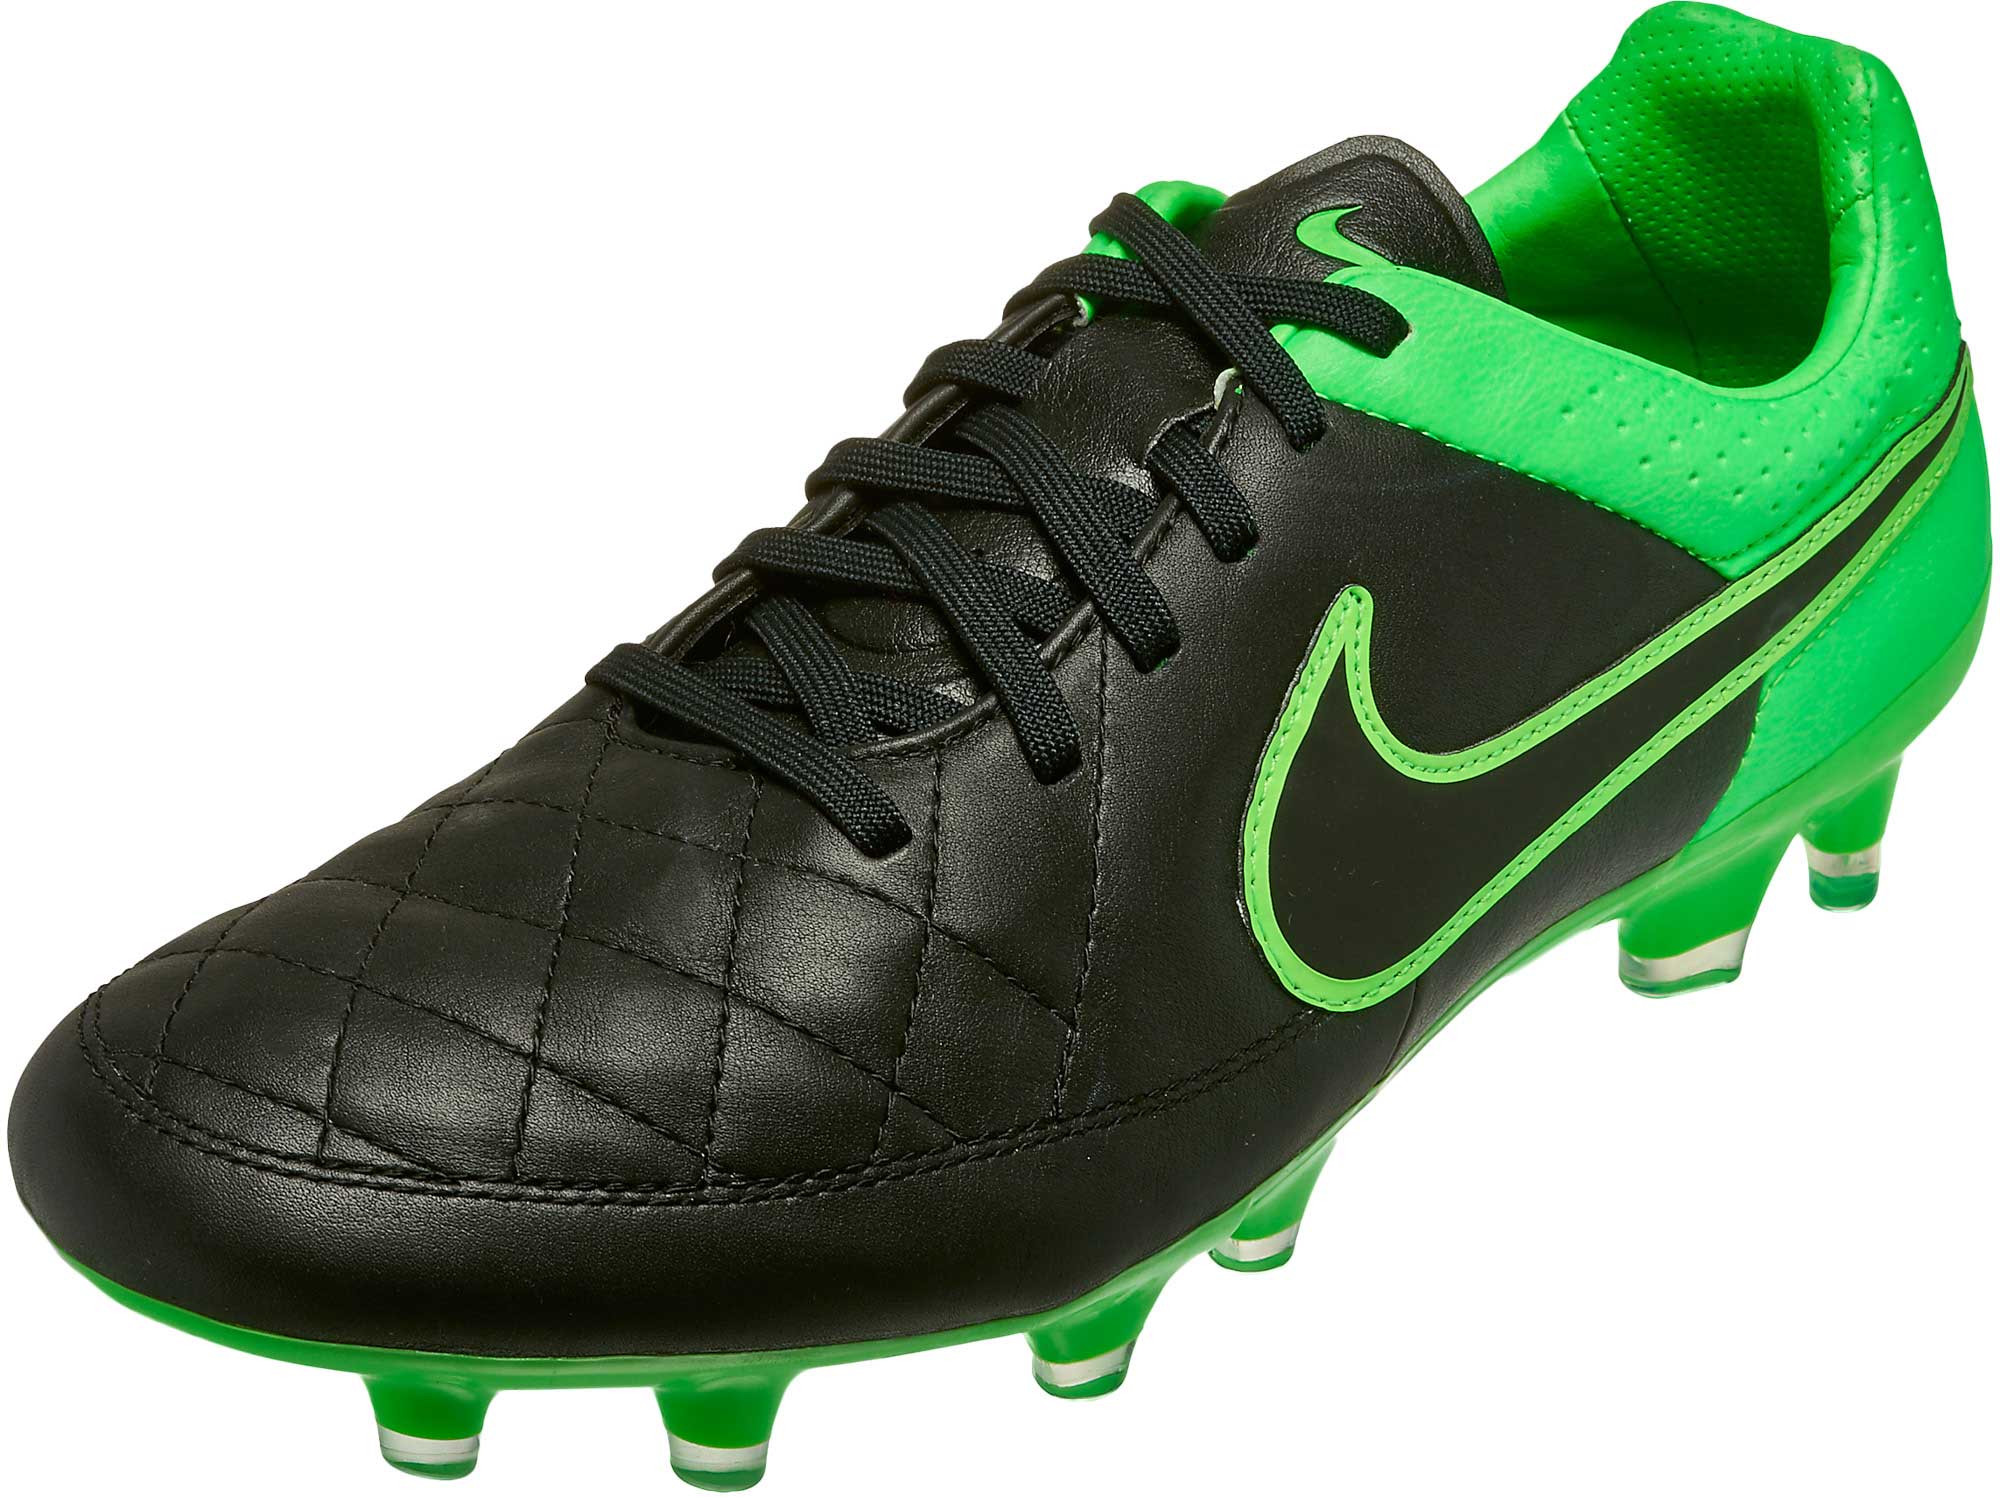 green and black nike soccer cleats